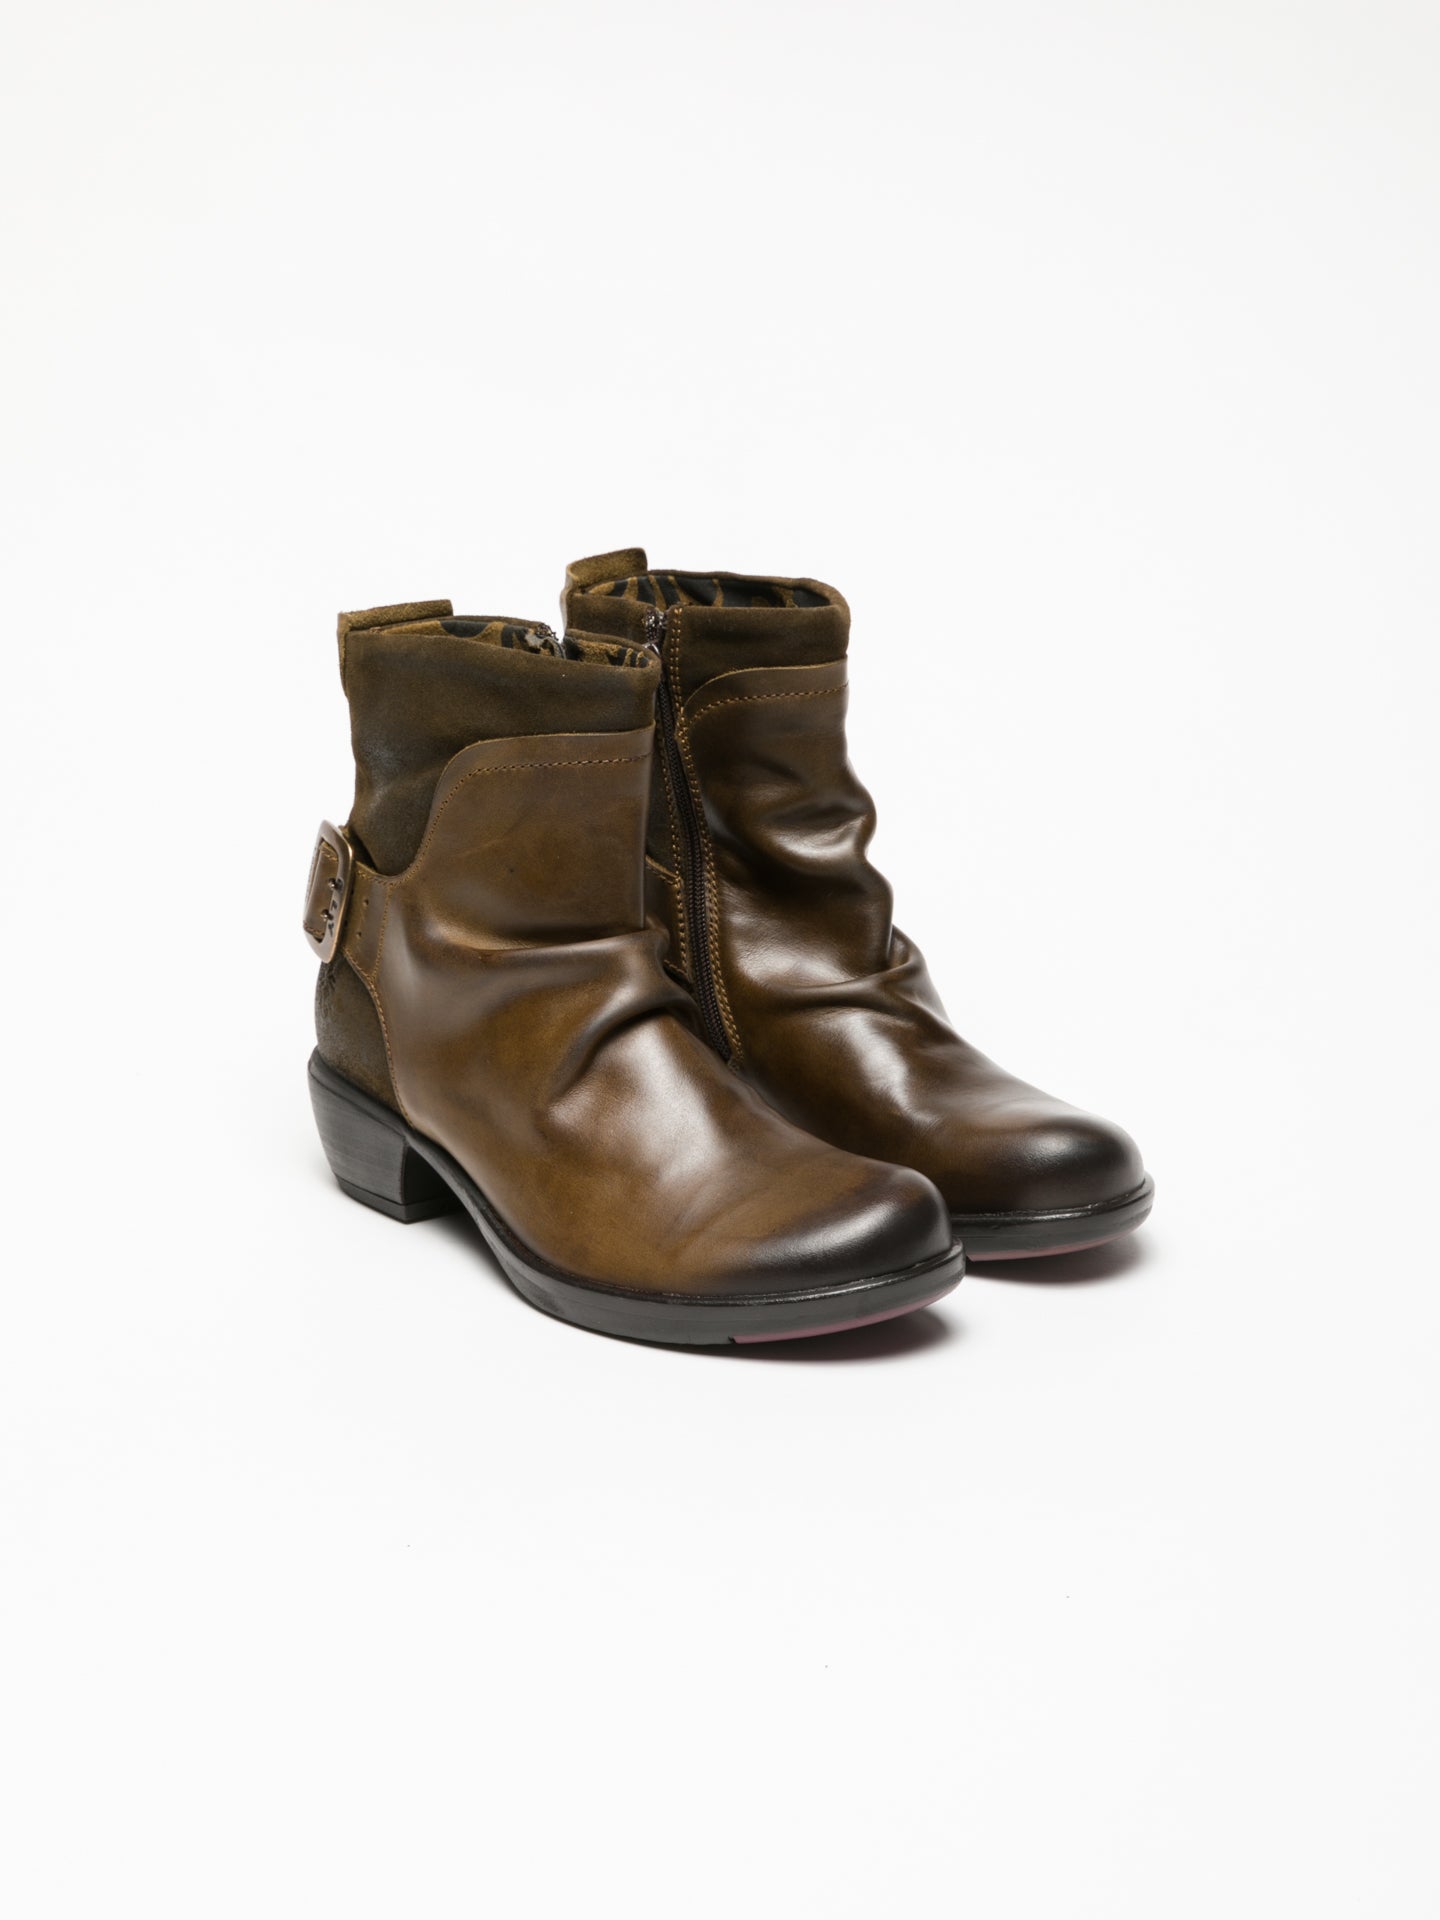 Fly London SaddleBrown Buckle Ankle Boots